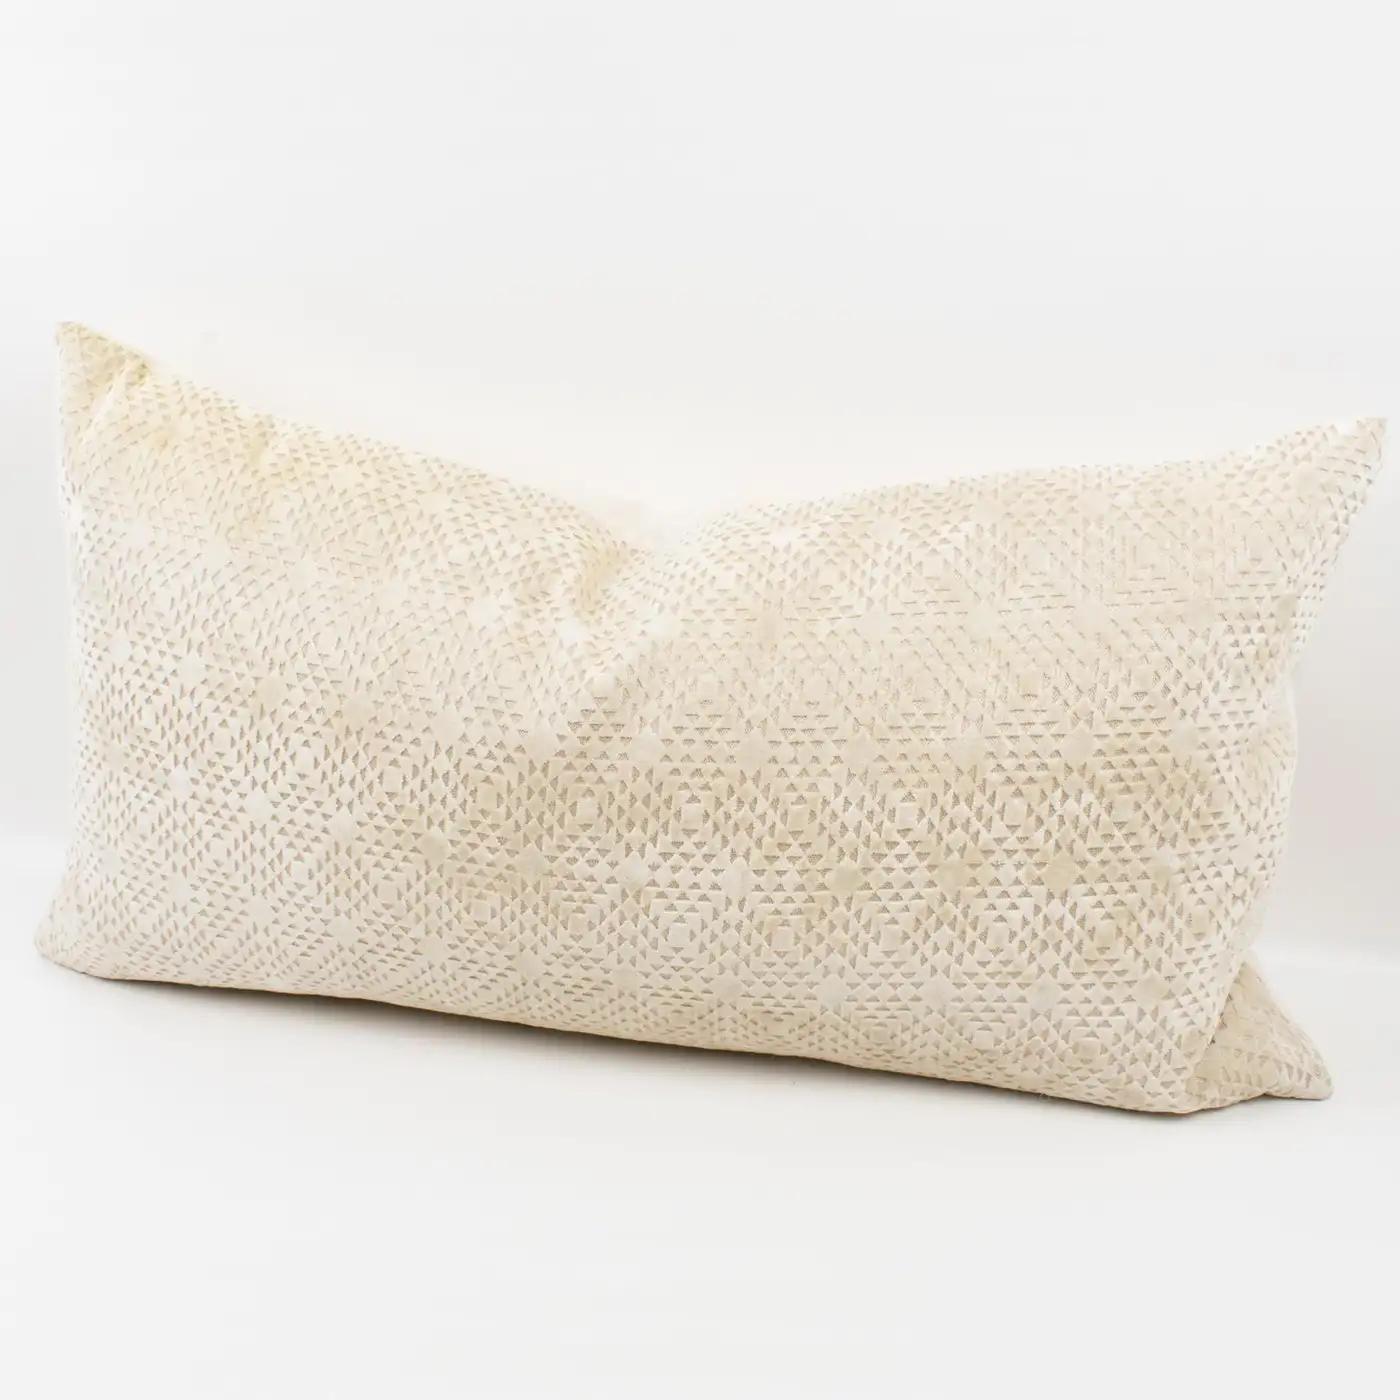 This lovely Art Deco-inspired velvet throw pillow features a lumbar-shaped pillow, covered on the front with a textured geometric design in off-white velvet. The back is made of the same colored velvet with a plain design. A zipper encloses an inner